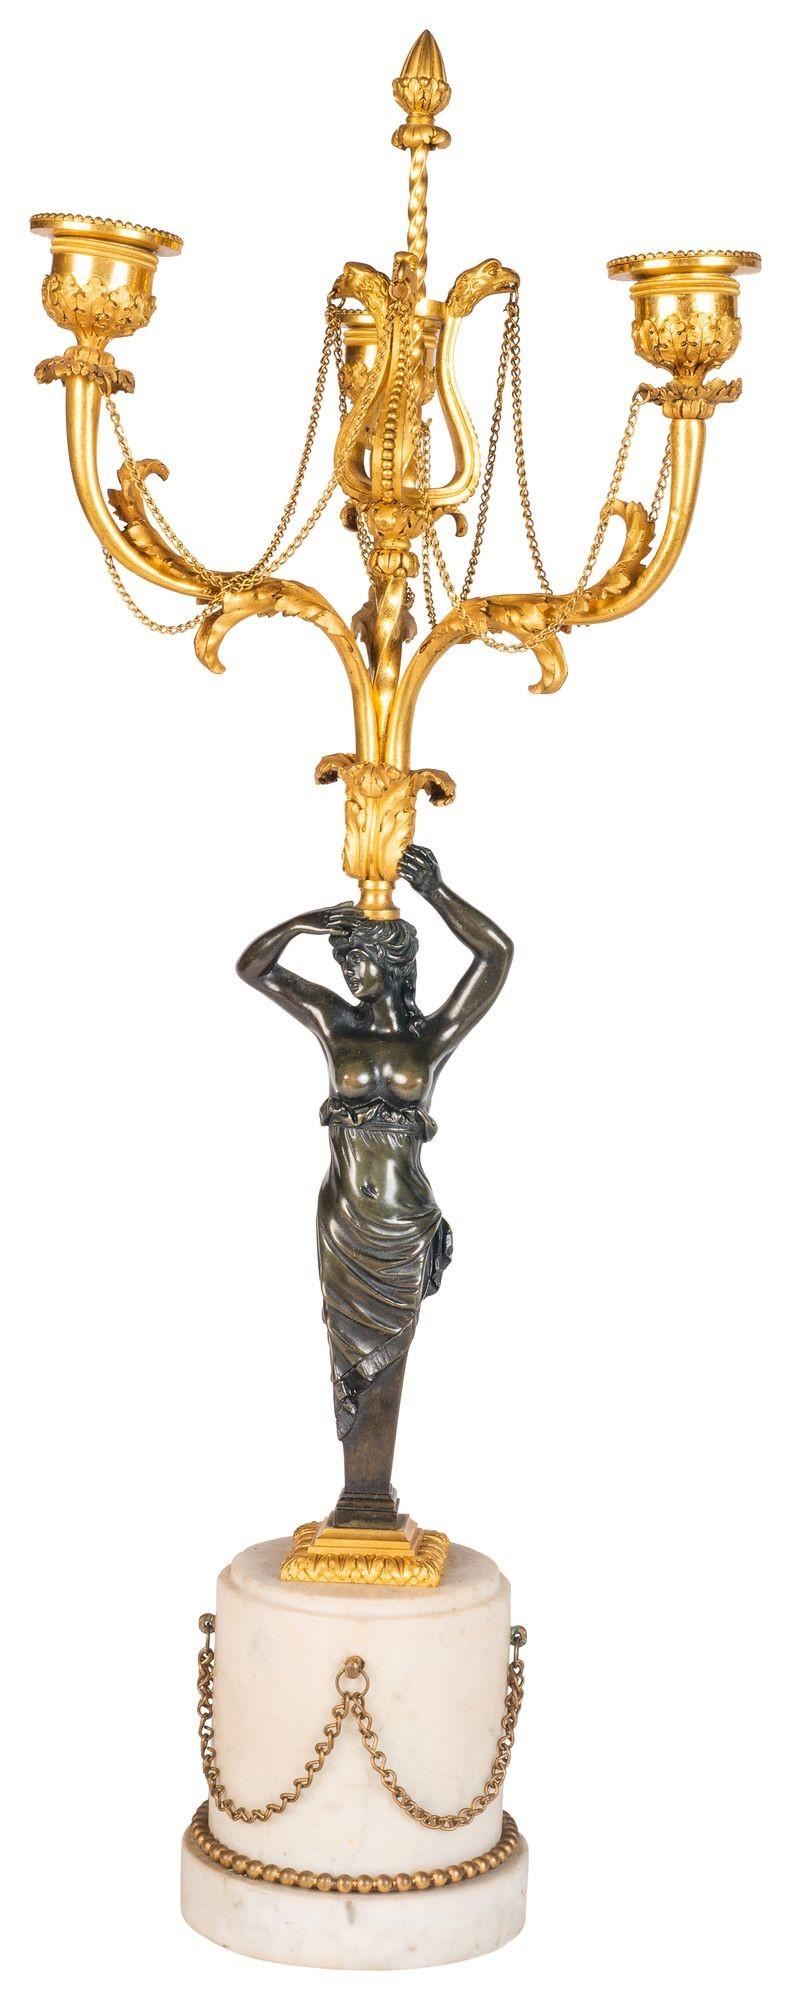 An elegant pair of Regency period bronze and gilded ormolu three branch candelabra, each having Swan neck and patinated bronze monopodia supports, mounted on Carrera marble plinths with chain swag decoration.

Batch 74